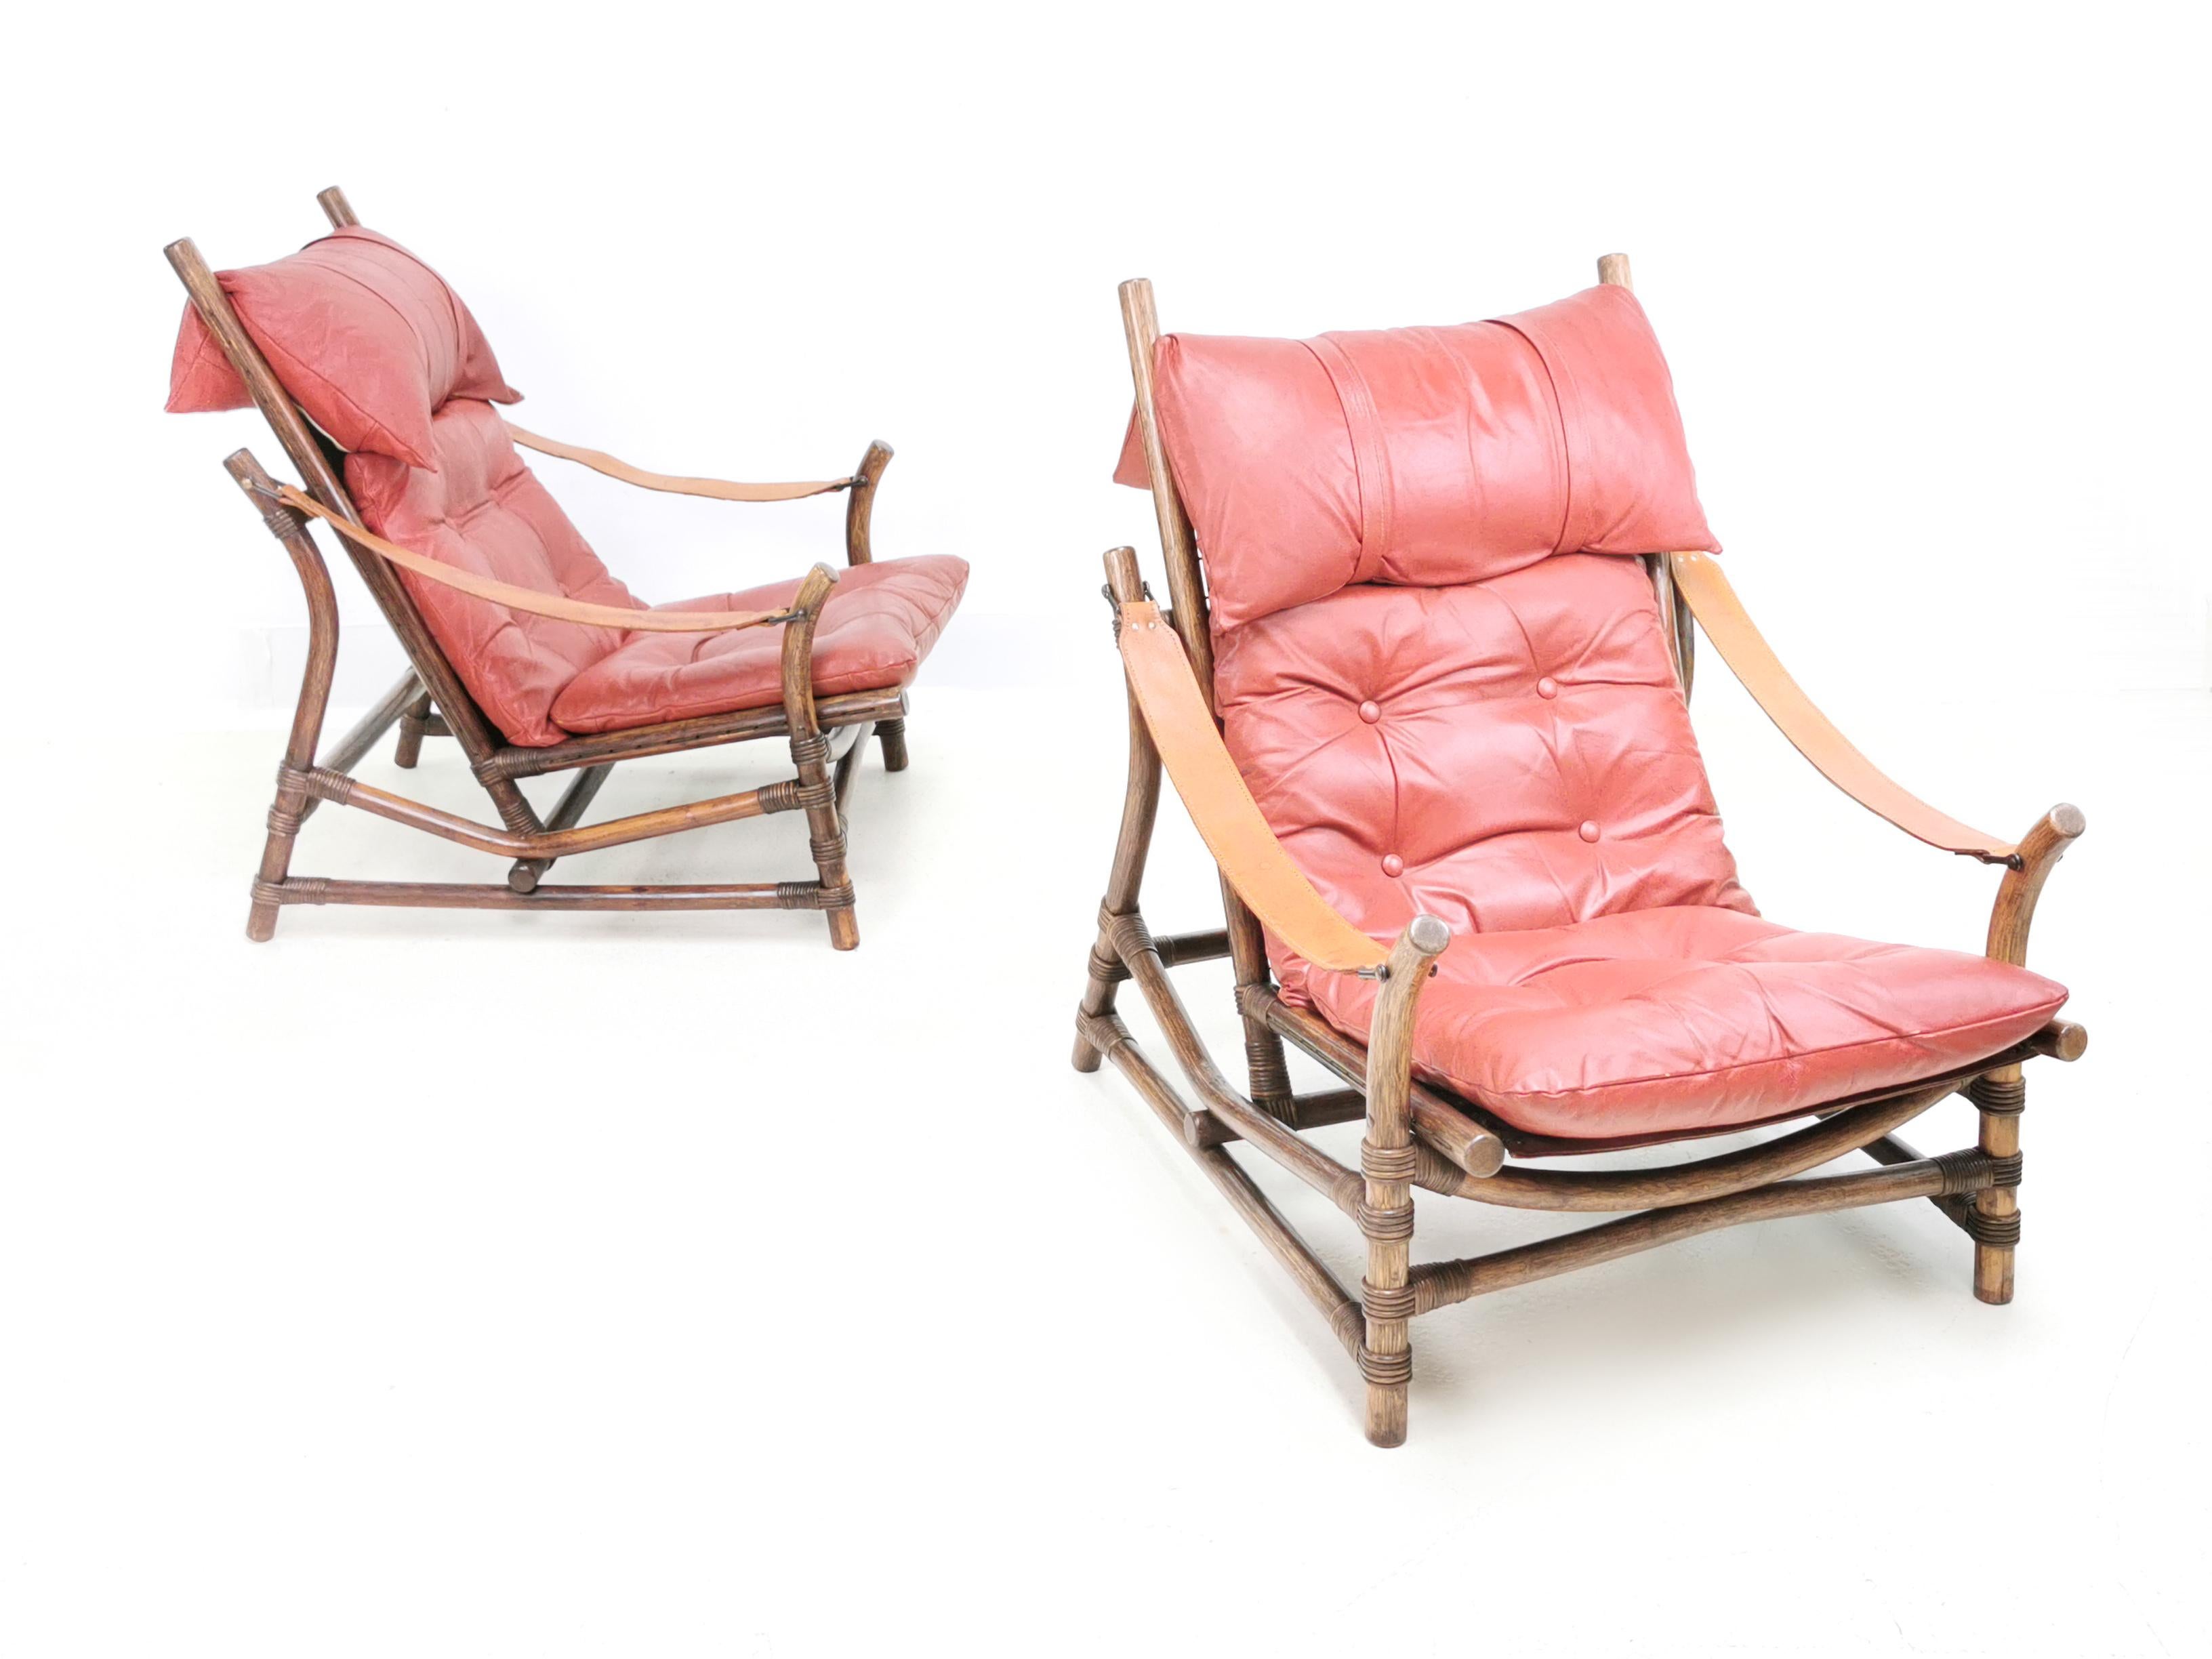 Mid century leather lounge chairs

A pair of leather strap armchairs. The pads are in red leather, and they sit on Pirelli stretchers, making them extremely comfortable.

The frames are bamboo with rattan loops. Quality chairs and made in